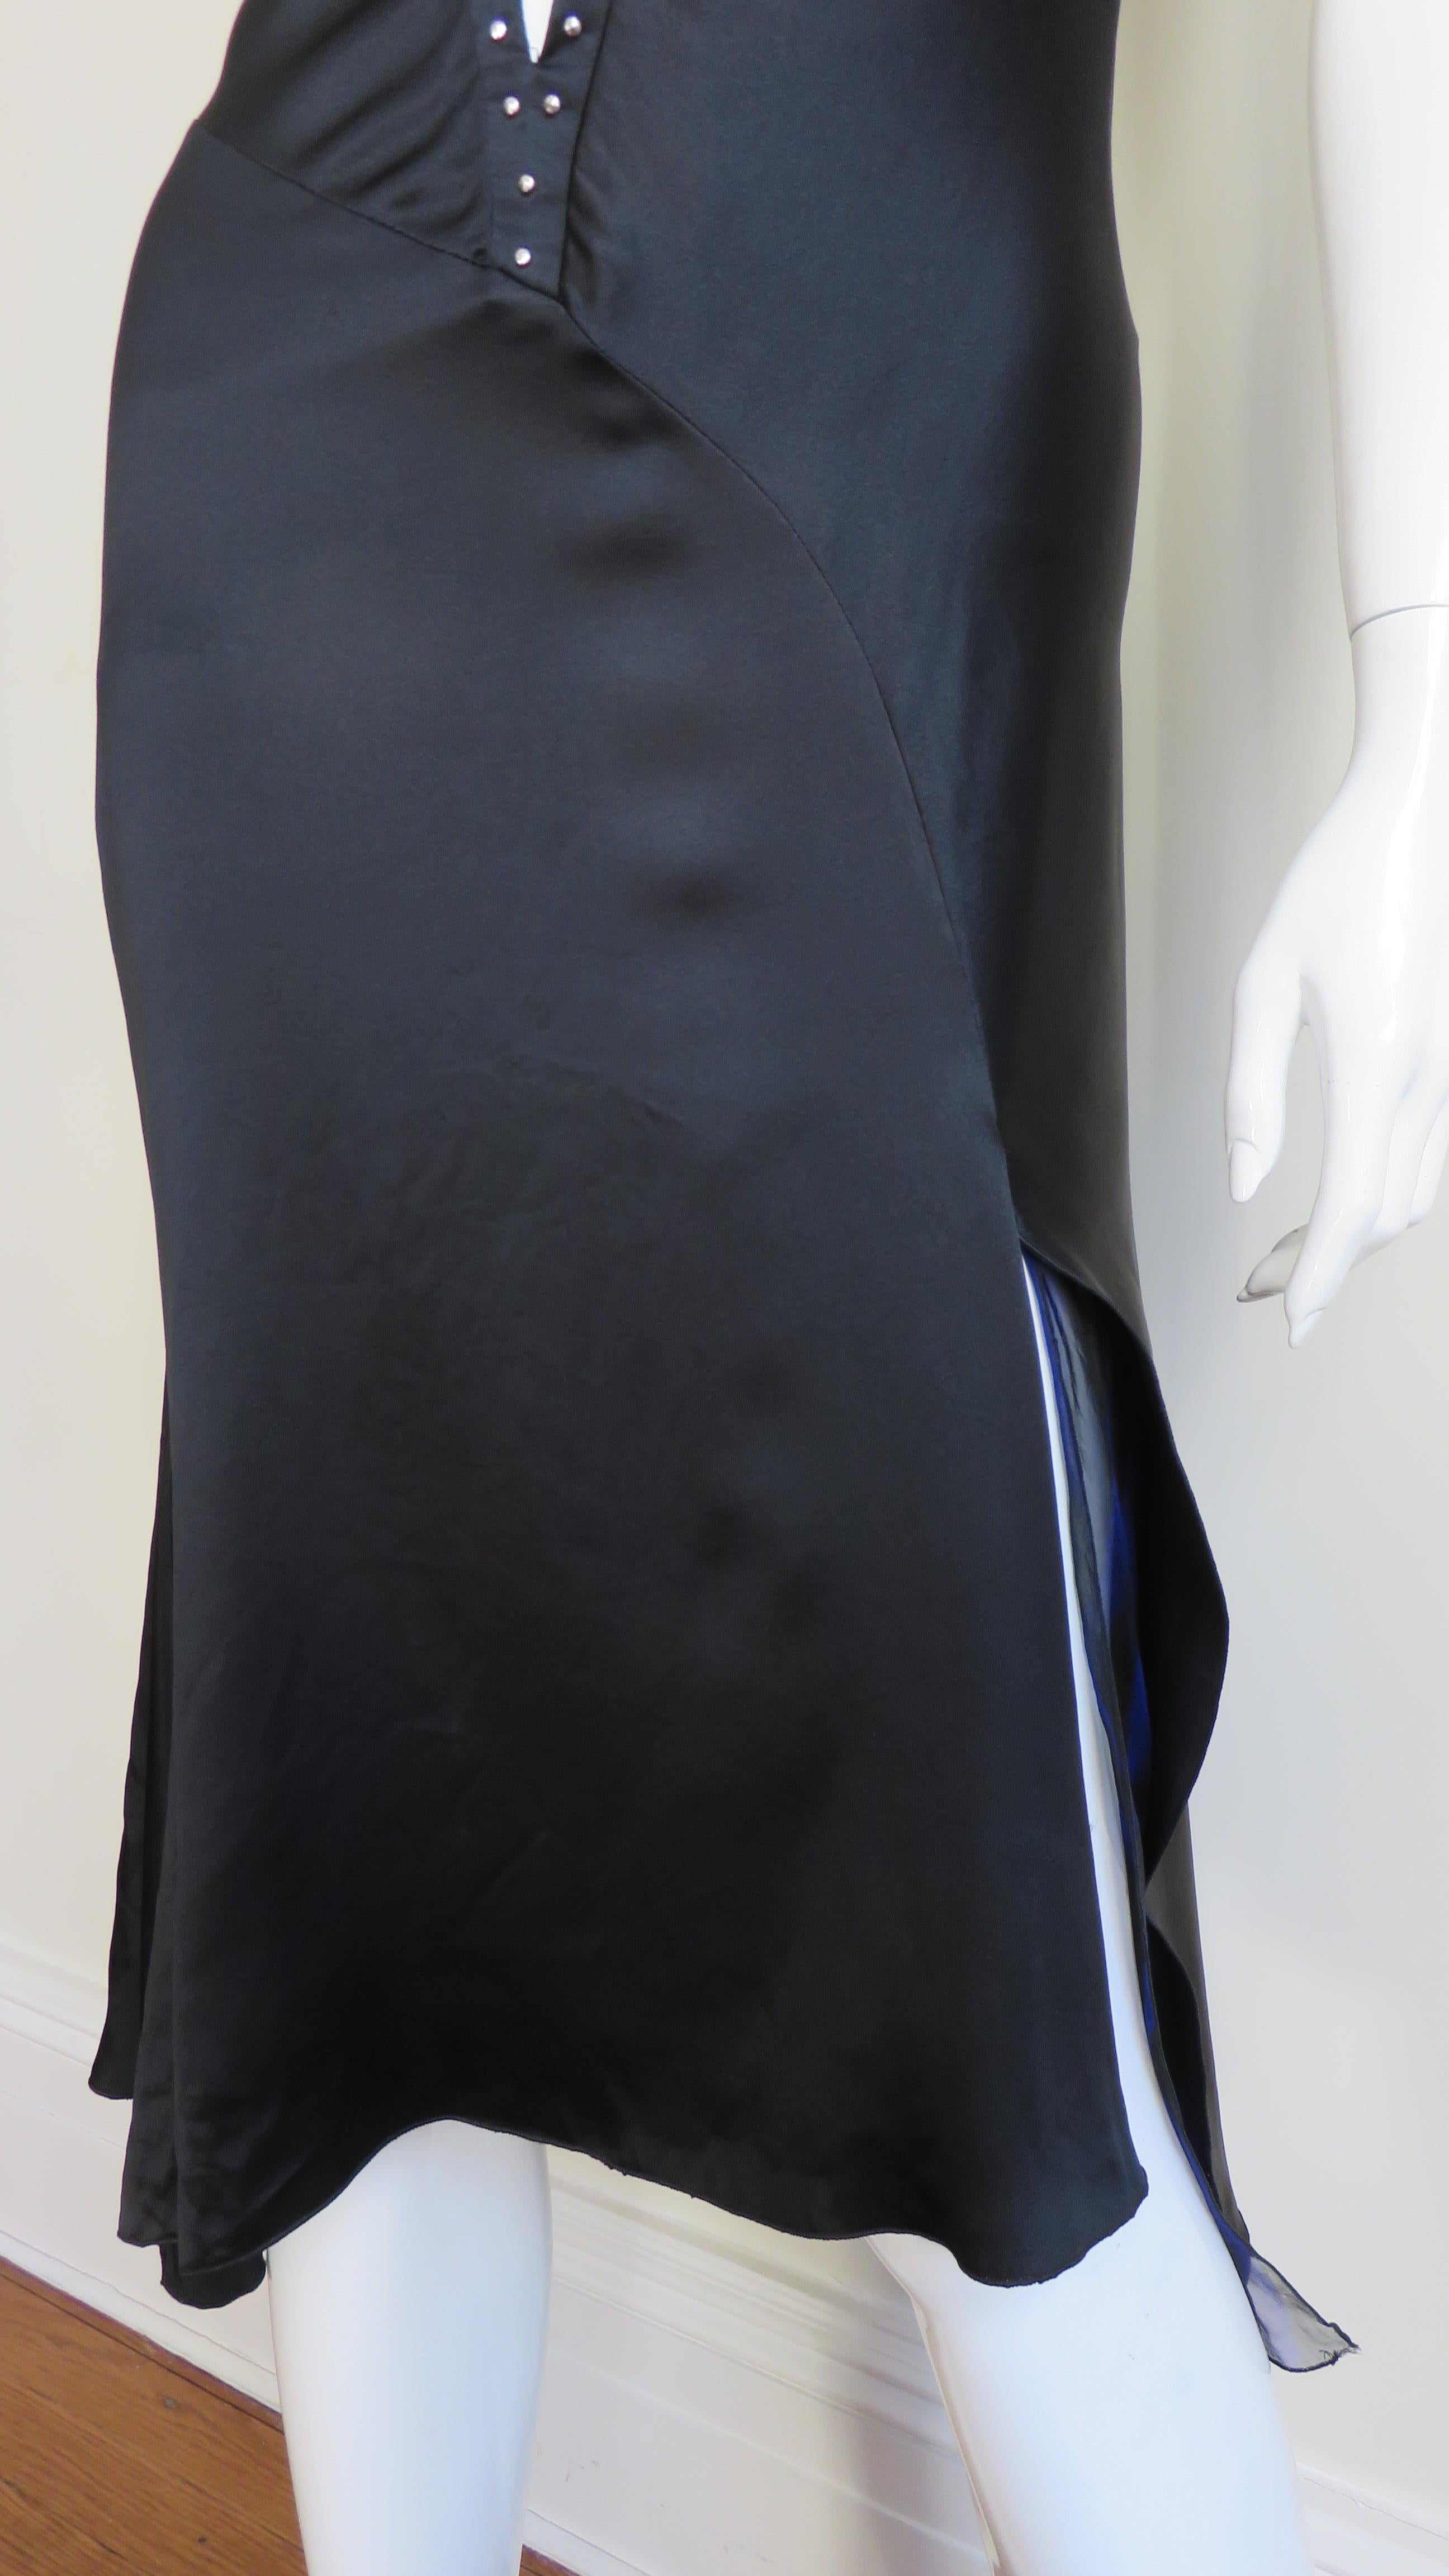   Versace Silk Dress with Studs S/S 2004 In Excellent Condition For Sale In Water Mill, NY